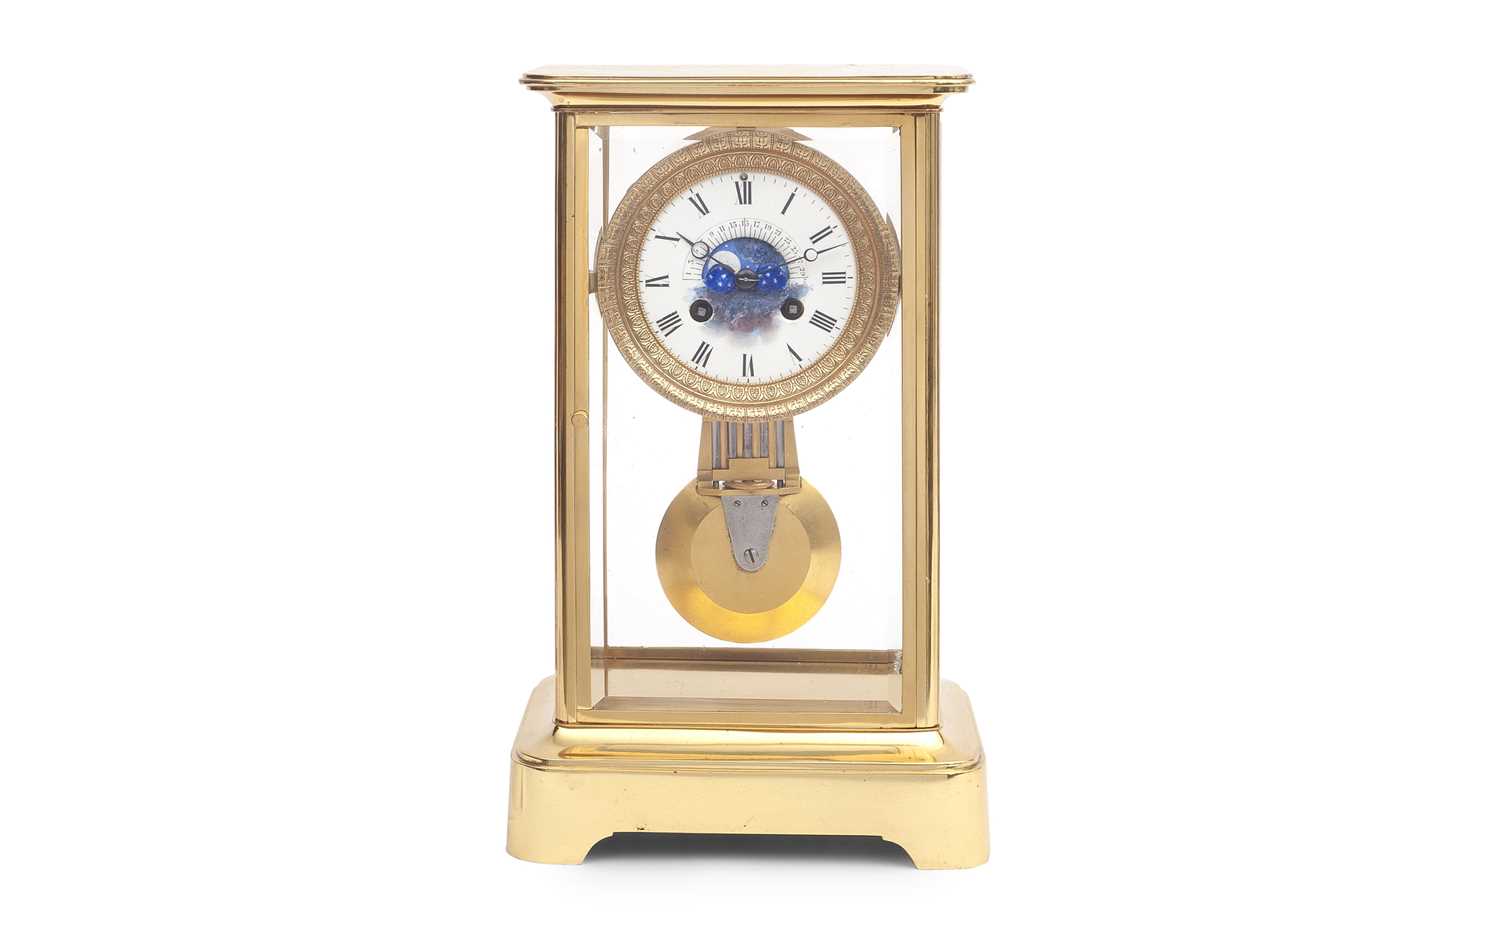 A FRENCH FOUR GLASS MANTEL CLOCK WITH MOONPHASE